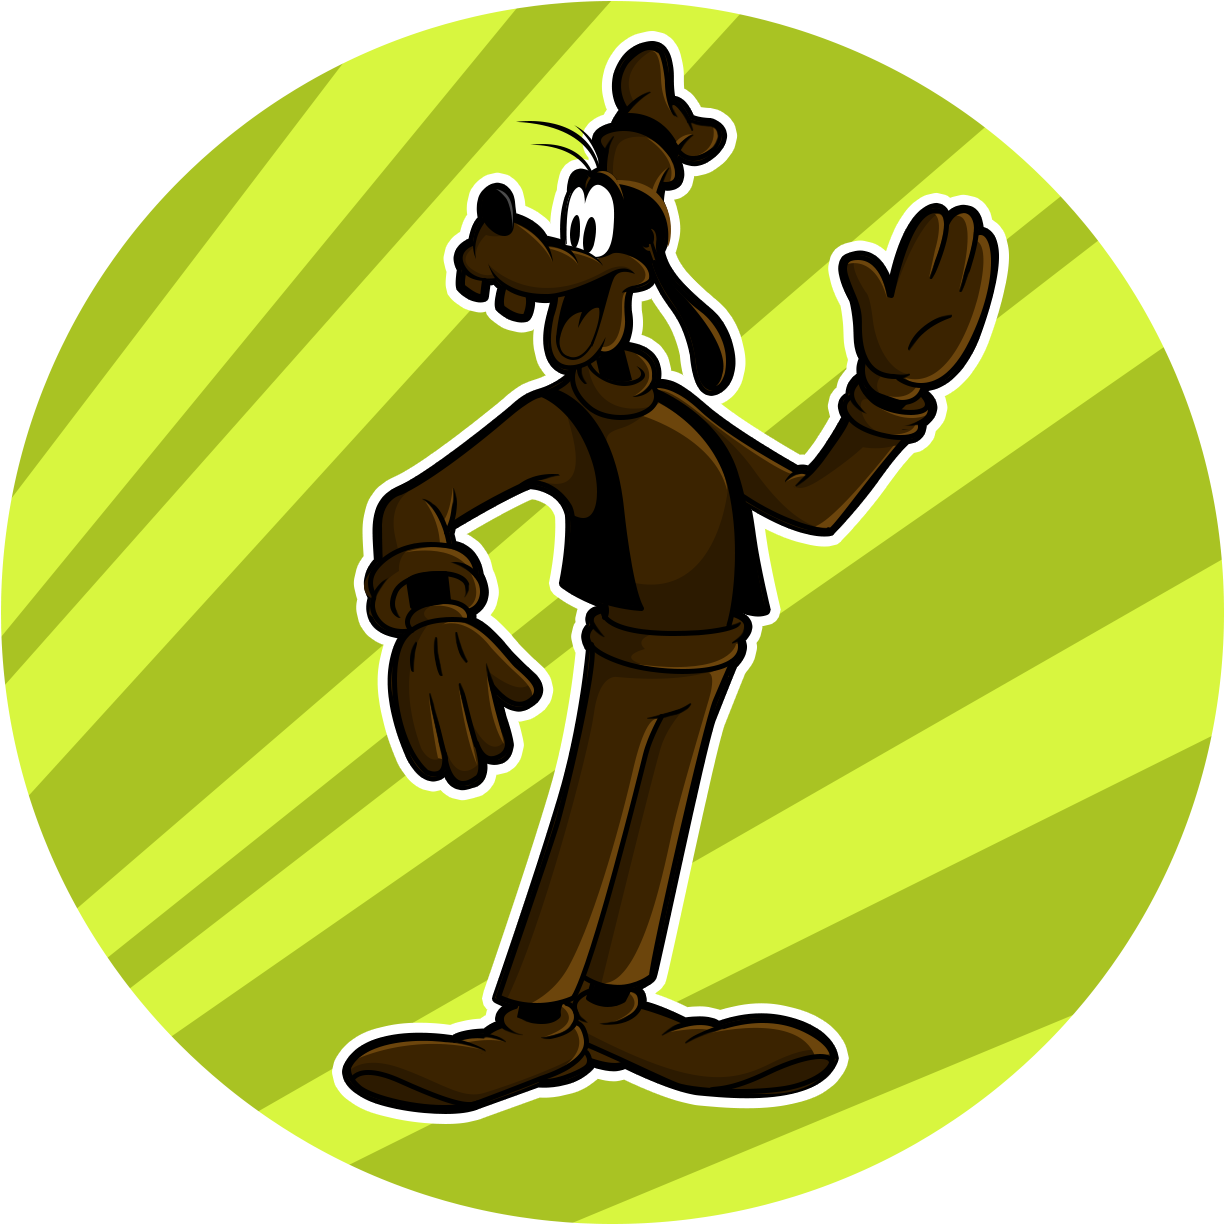 Goofy Character Greeting Pose PNG